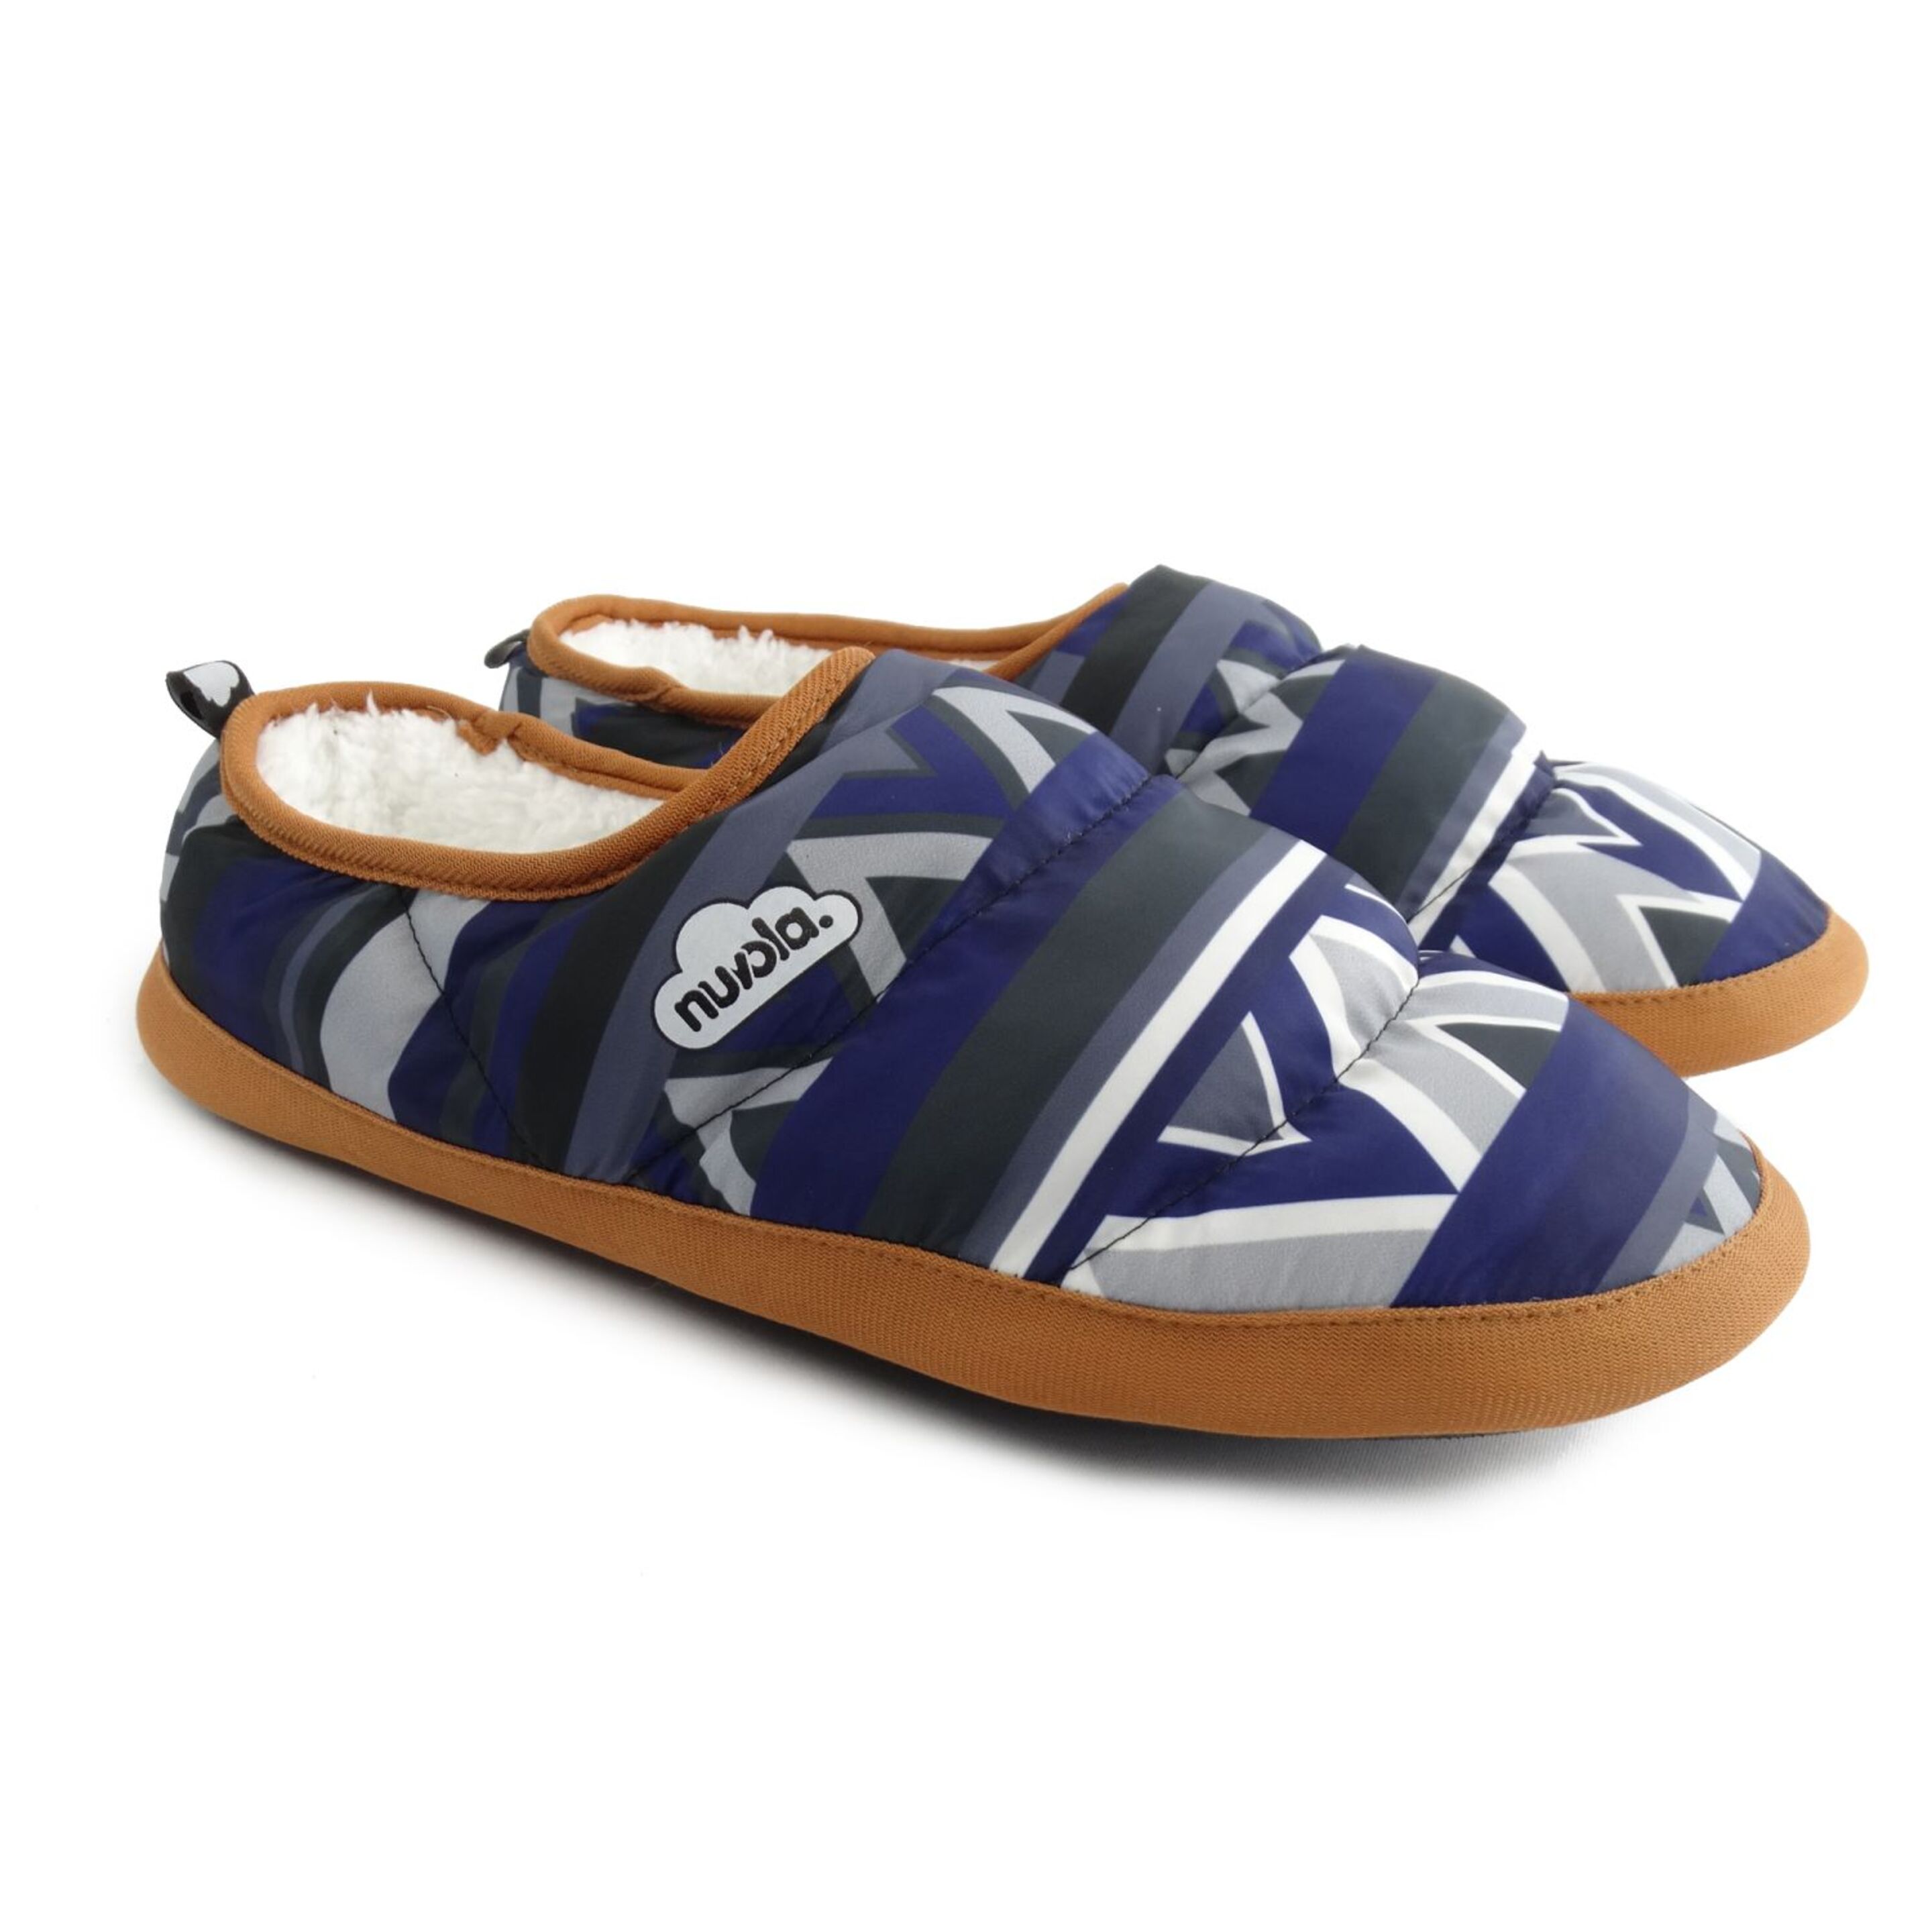 Slippers Camping NuvolaÂ®,chill